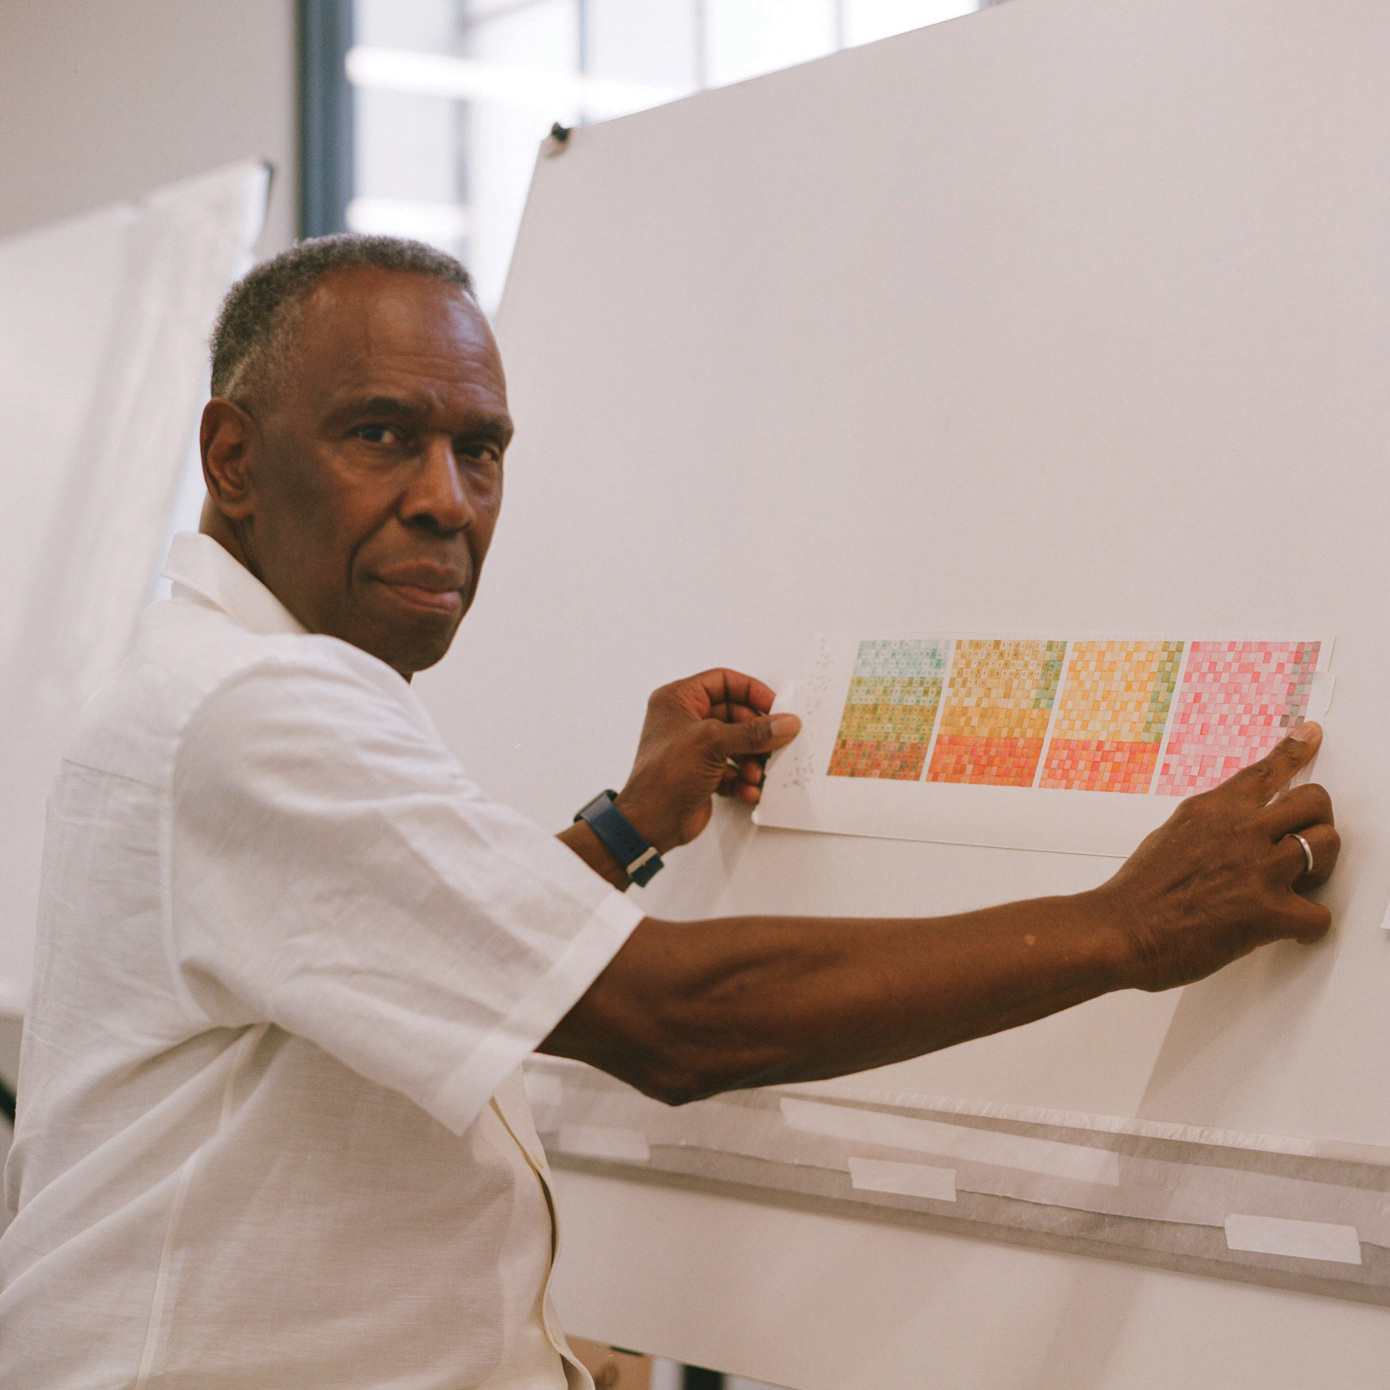 Charles Gaines sitting in front of an easel.